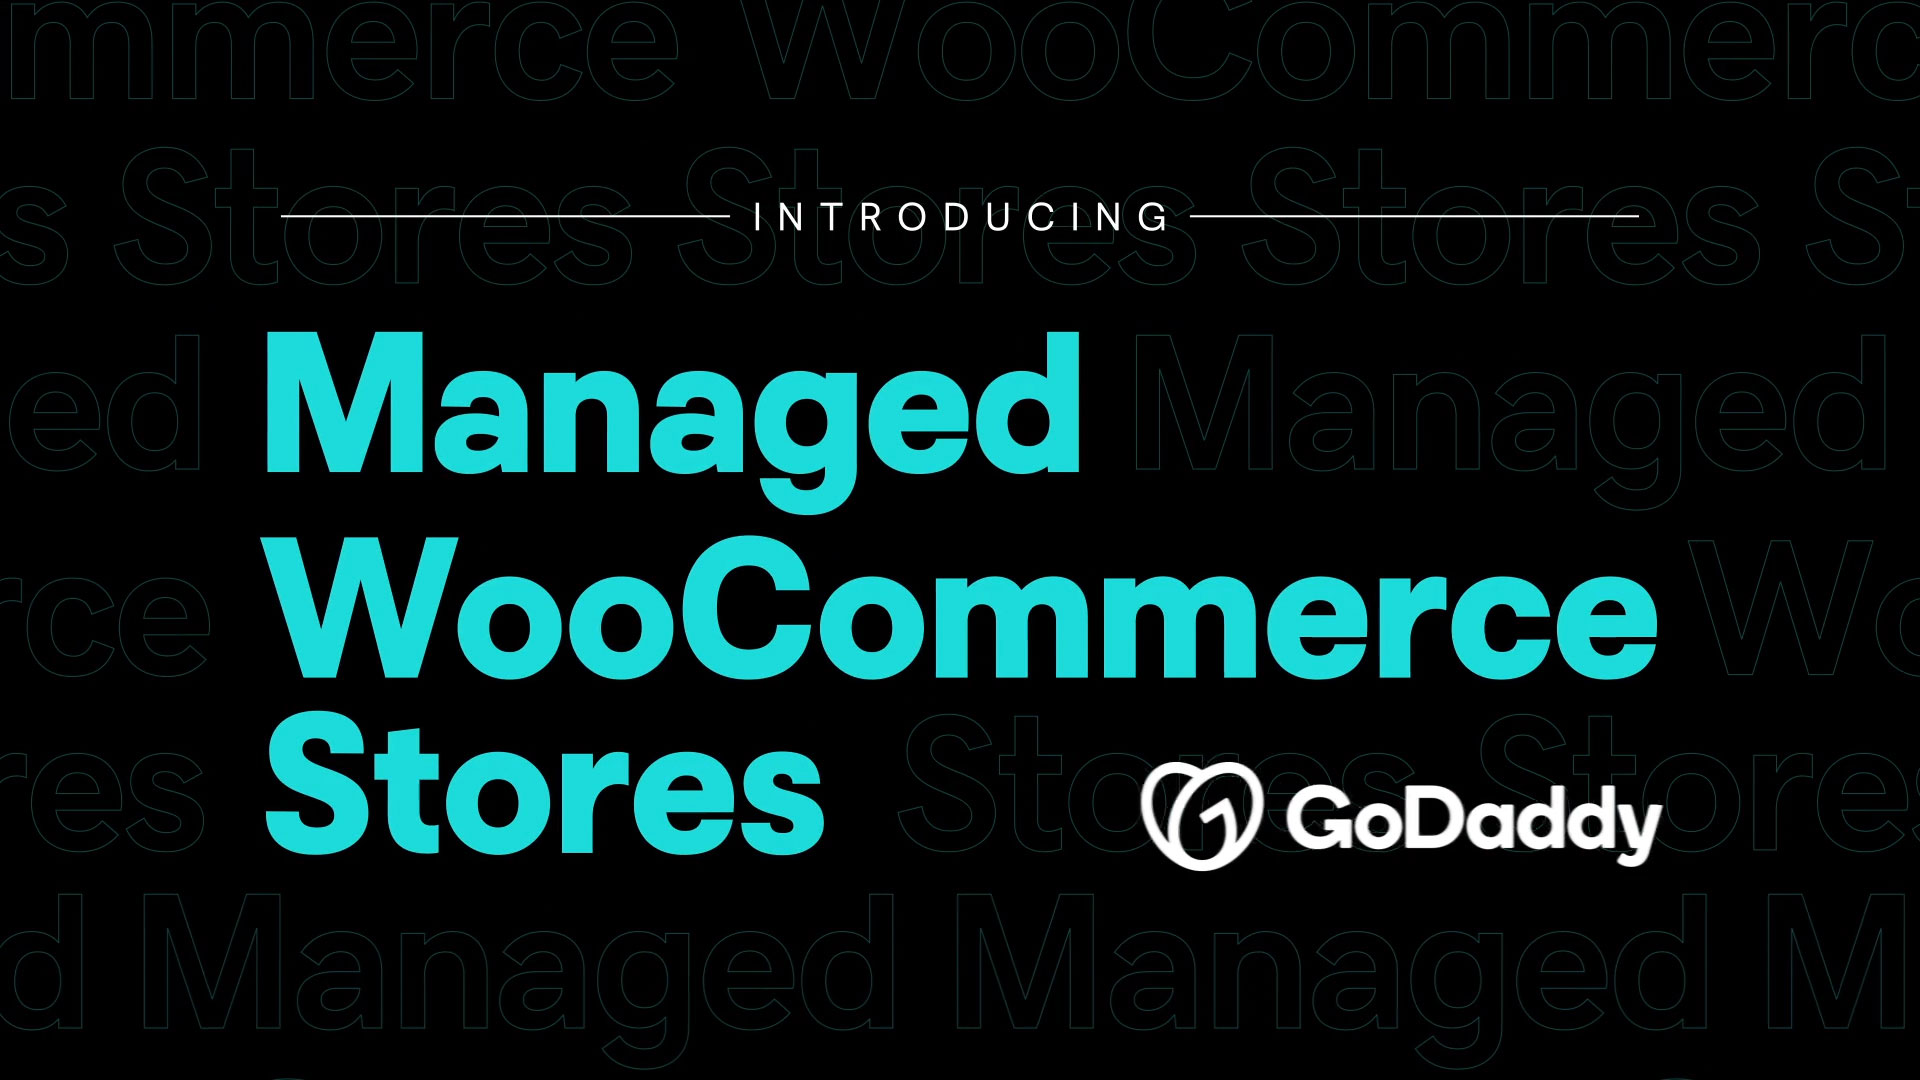 GoDaddy's Managed WooCommerce Stores solution allows businesses to sell wherever customers shop through flexible, scalable and fully managed WordPress eCommerce stores.